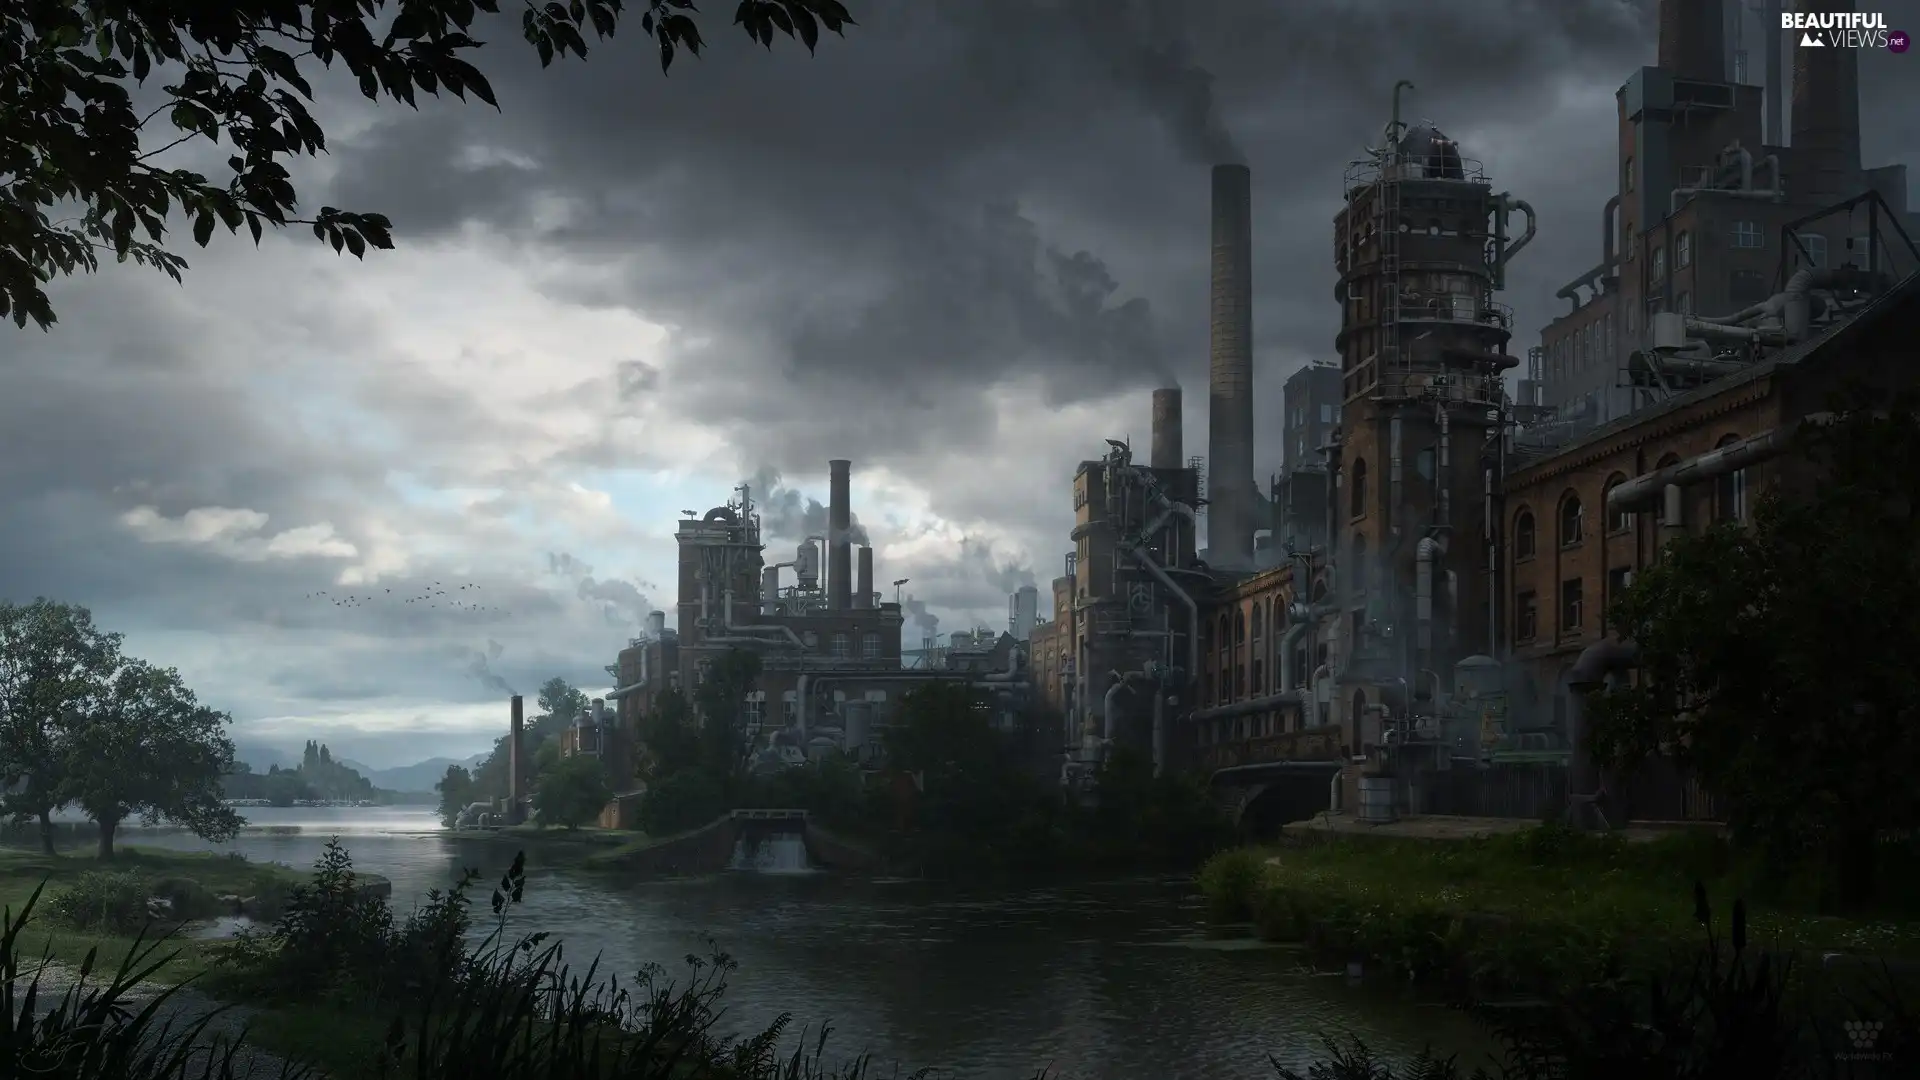 factory, industry, Matte painting, Chimneys, clouds, buildings, River, Sky